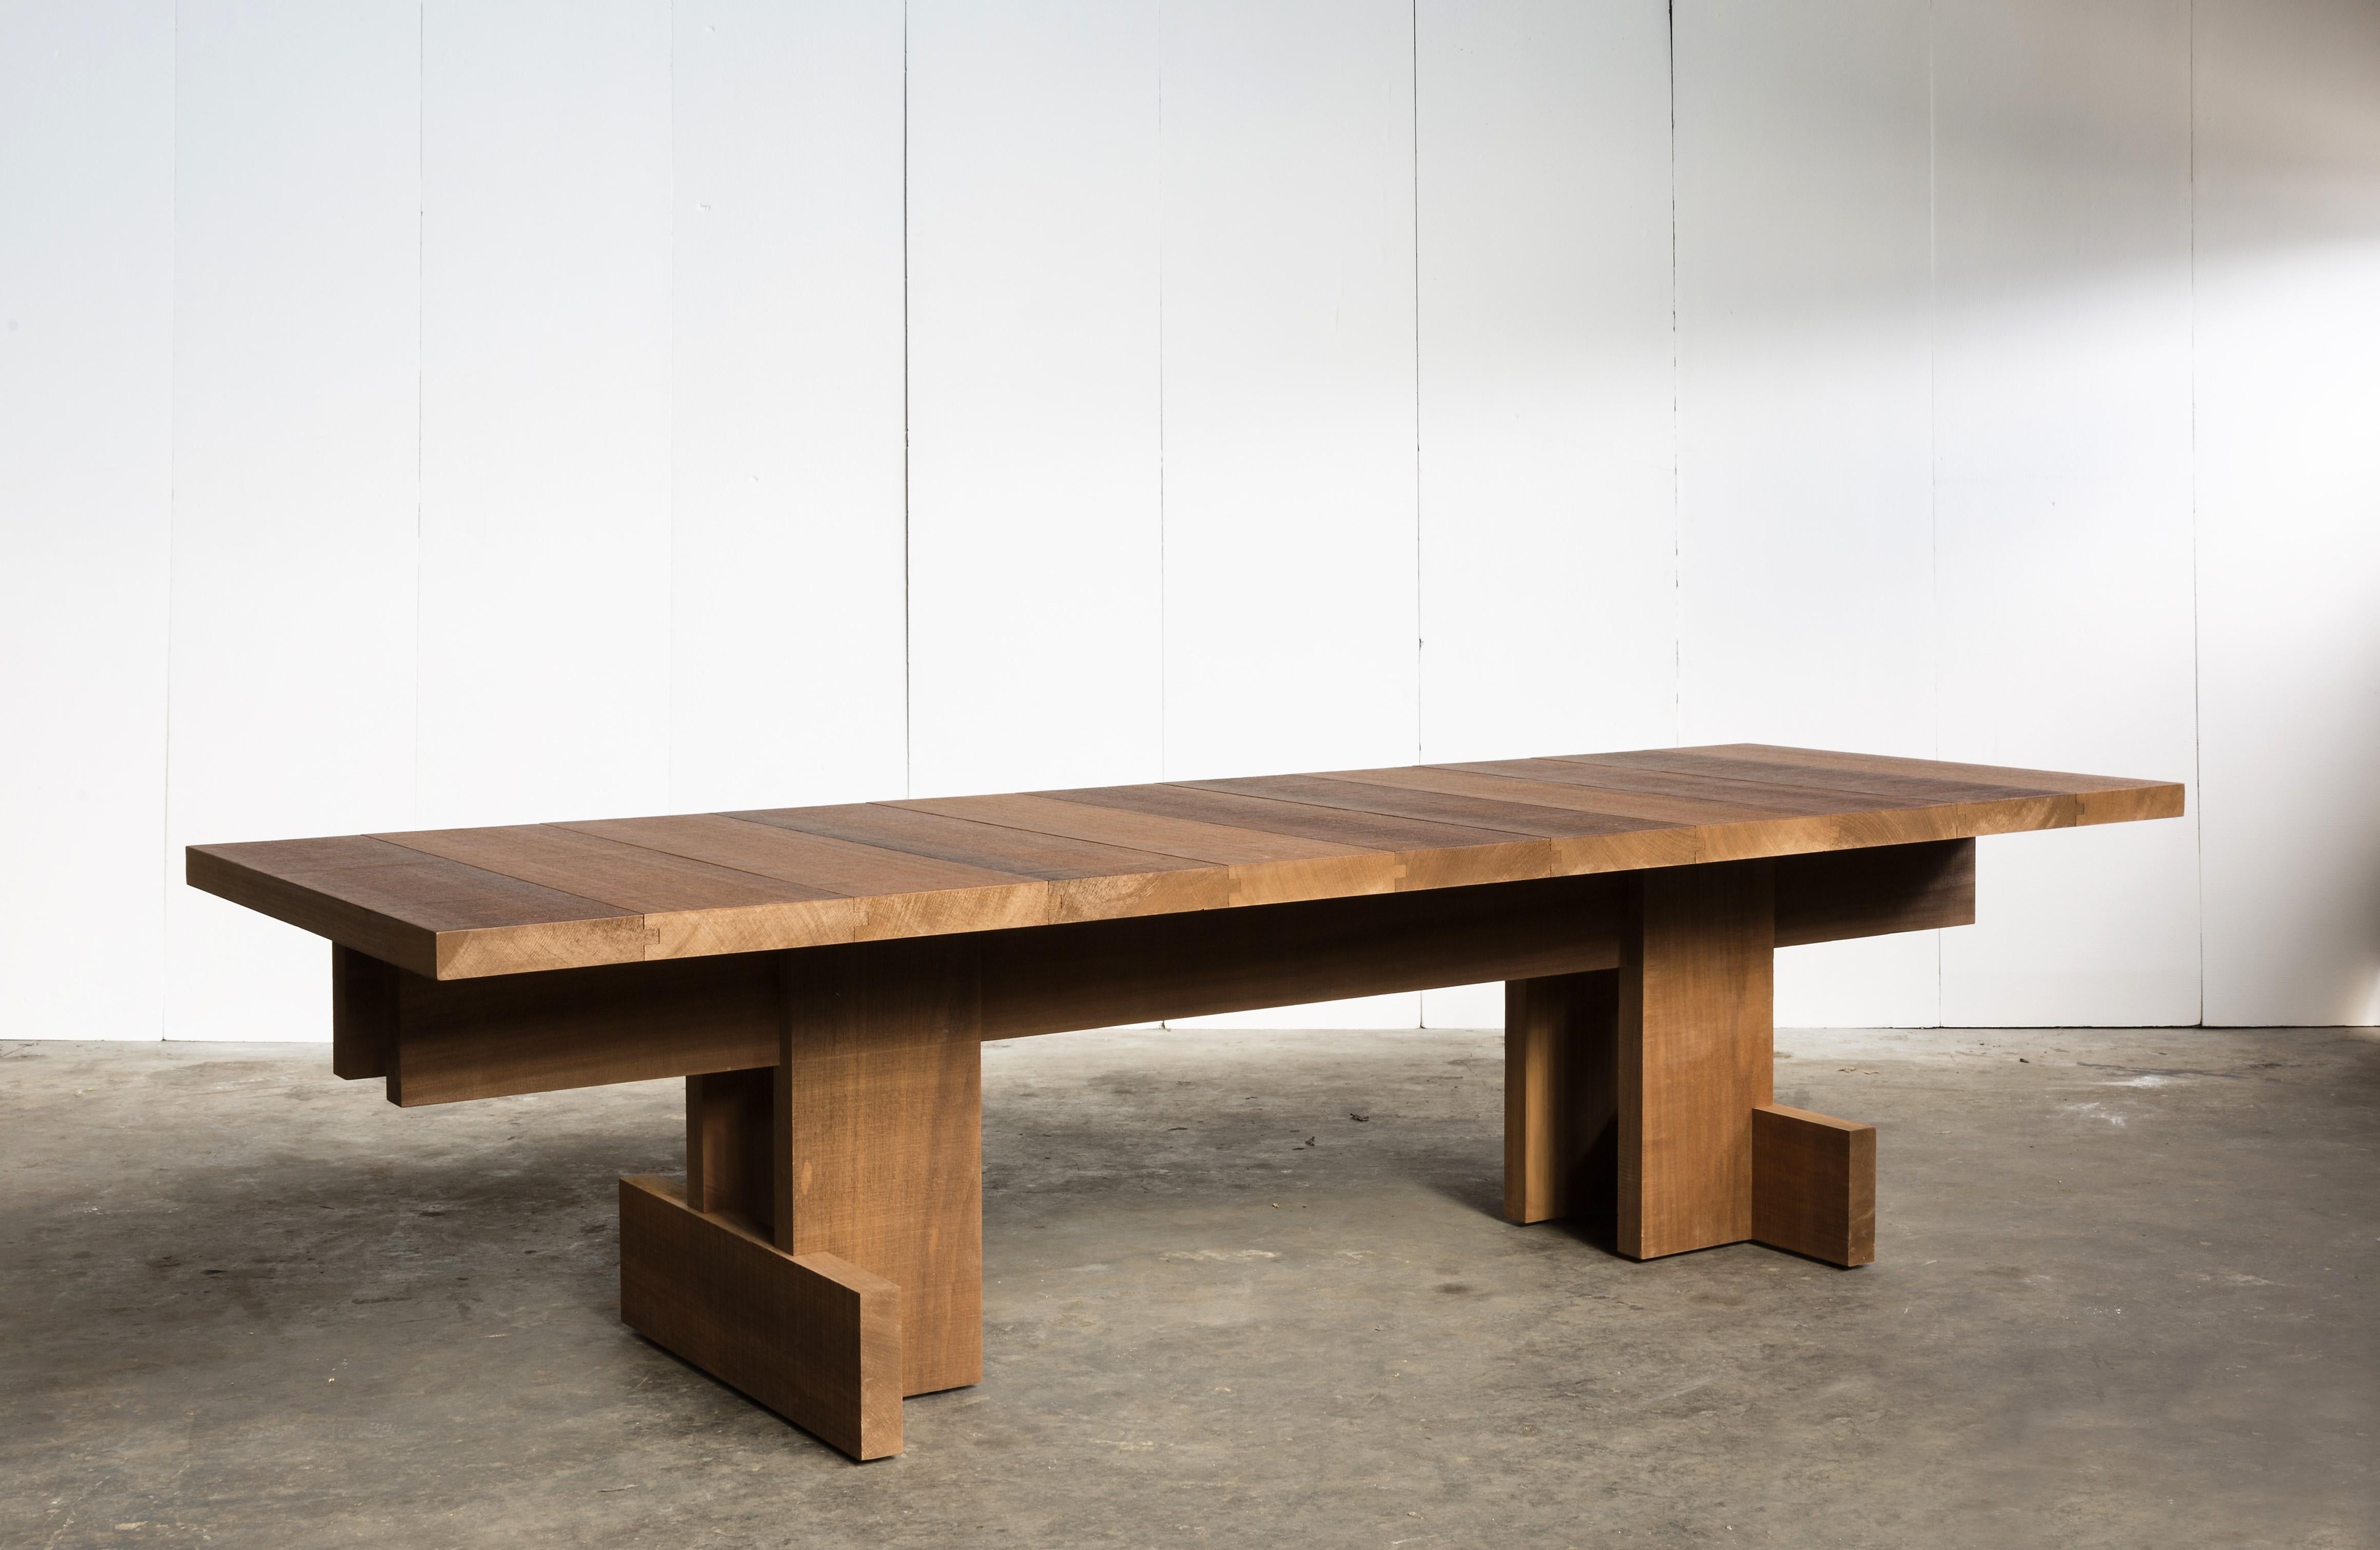 Handcrafted of solid African Ayous wood and finished with oil, the table is suitable for use both indoors and outdoors. Top is approx. 5.5cm thick.
Made to Measure table – Multiple customization options.
This item is made of solid wood.  Any